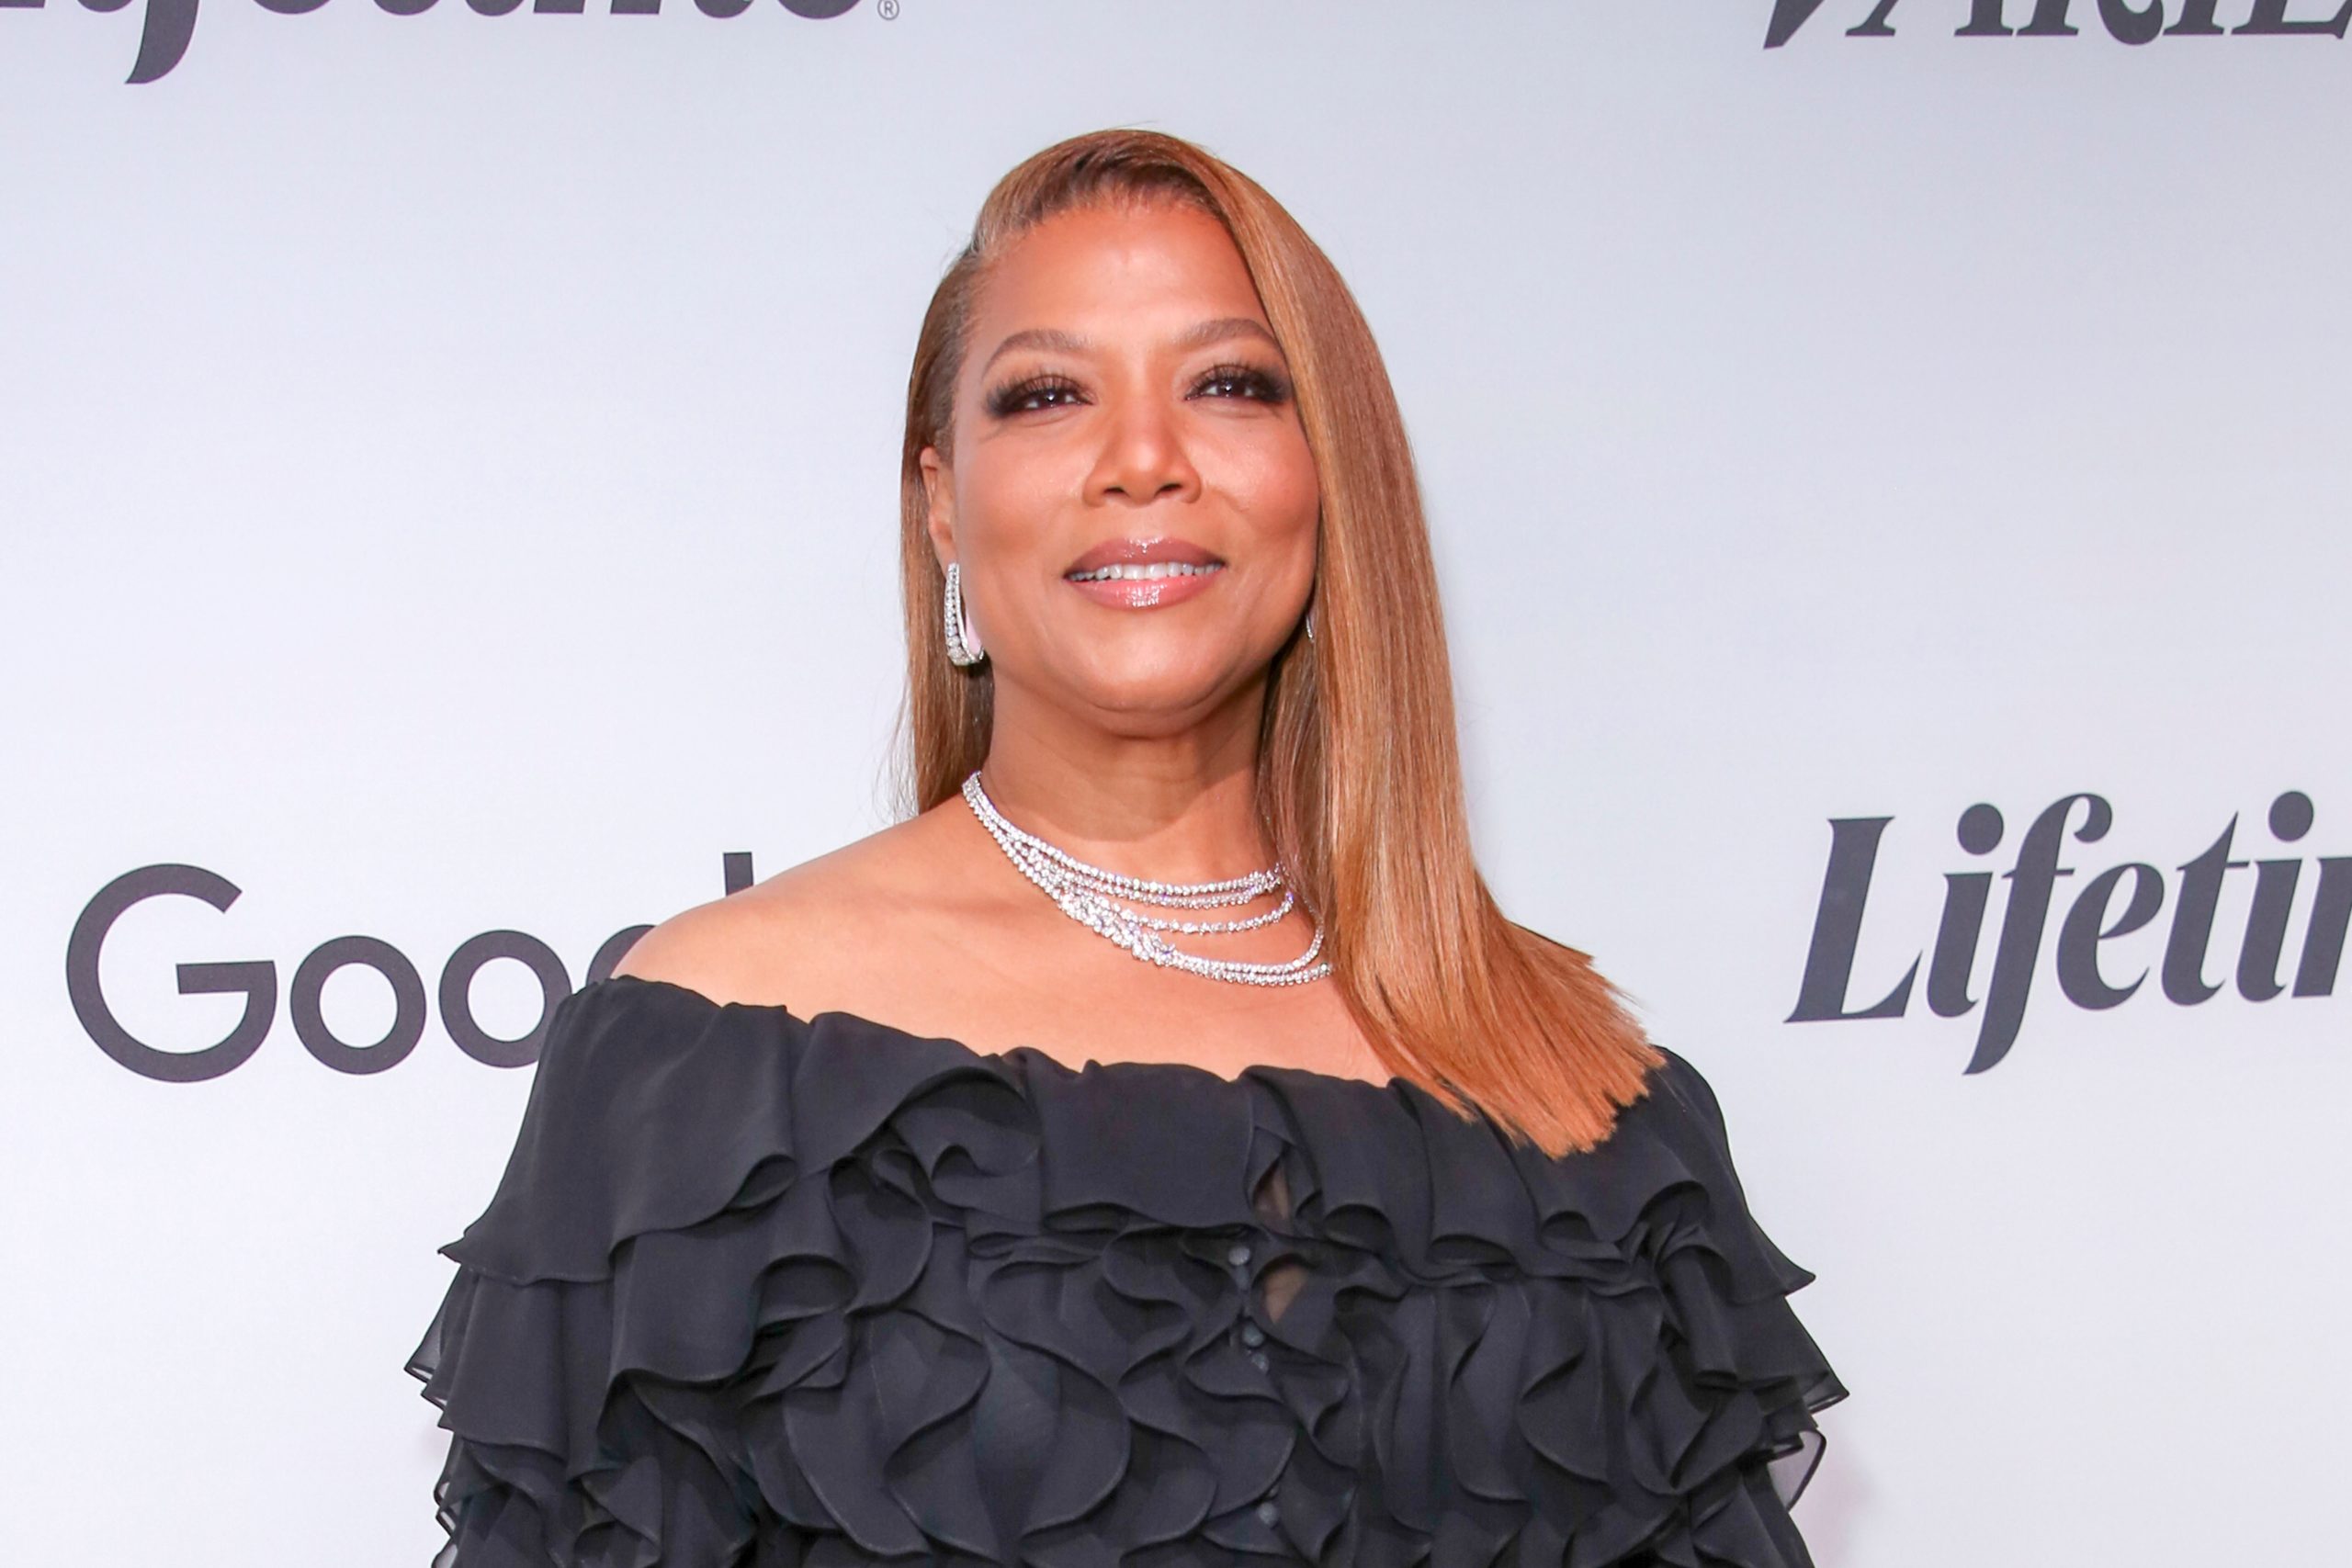 Queen Latifah & 'The Equalizer' - A Powerhouse Combination